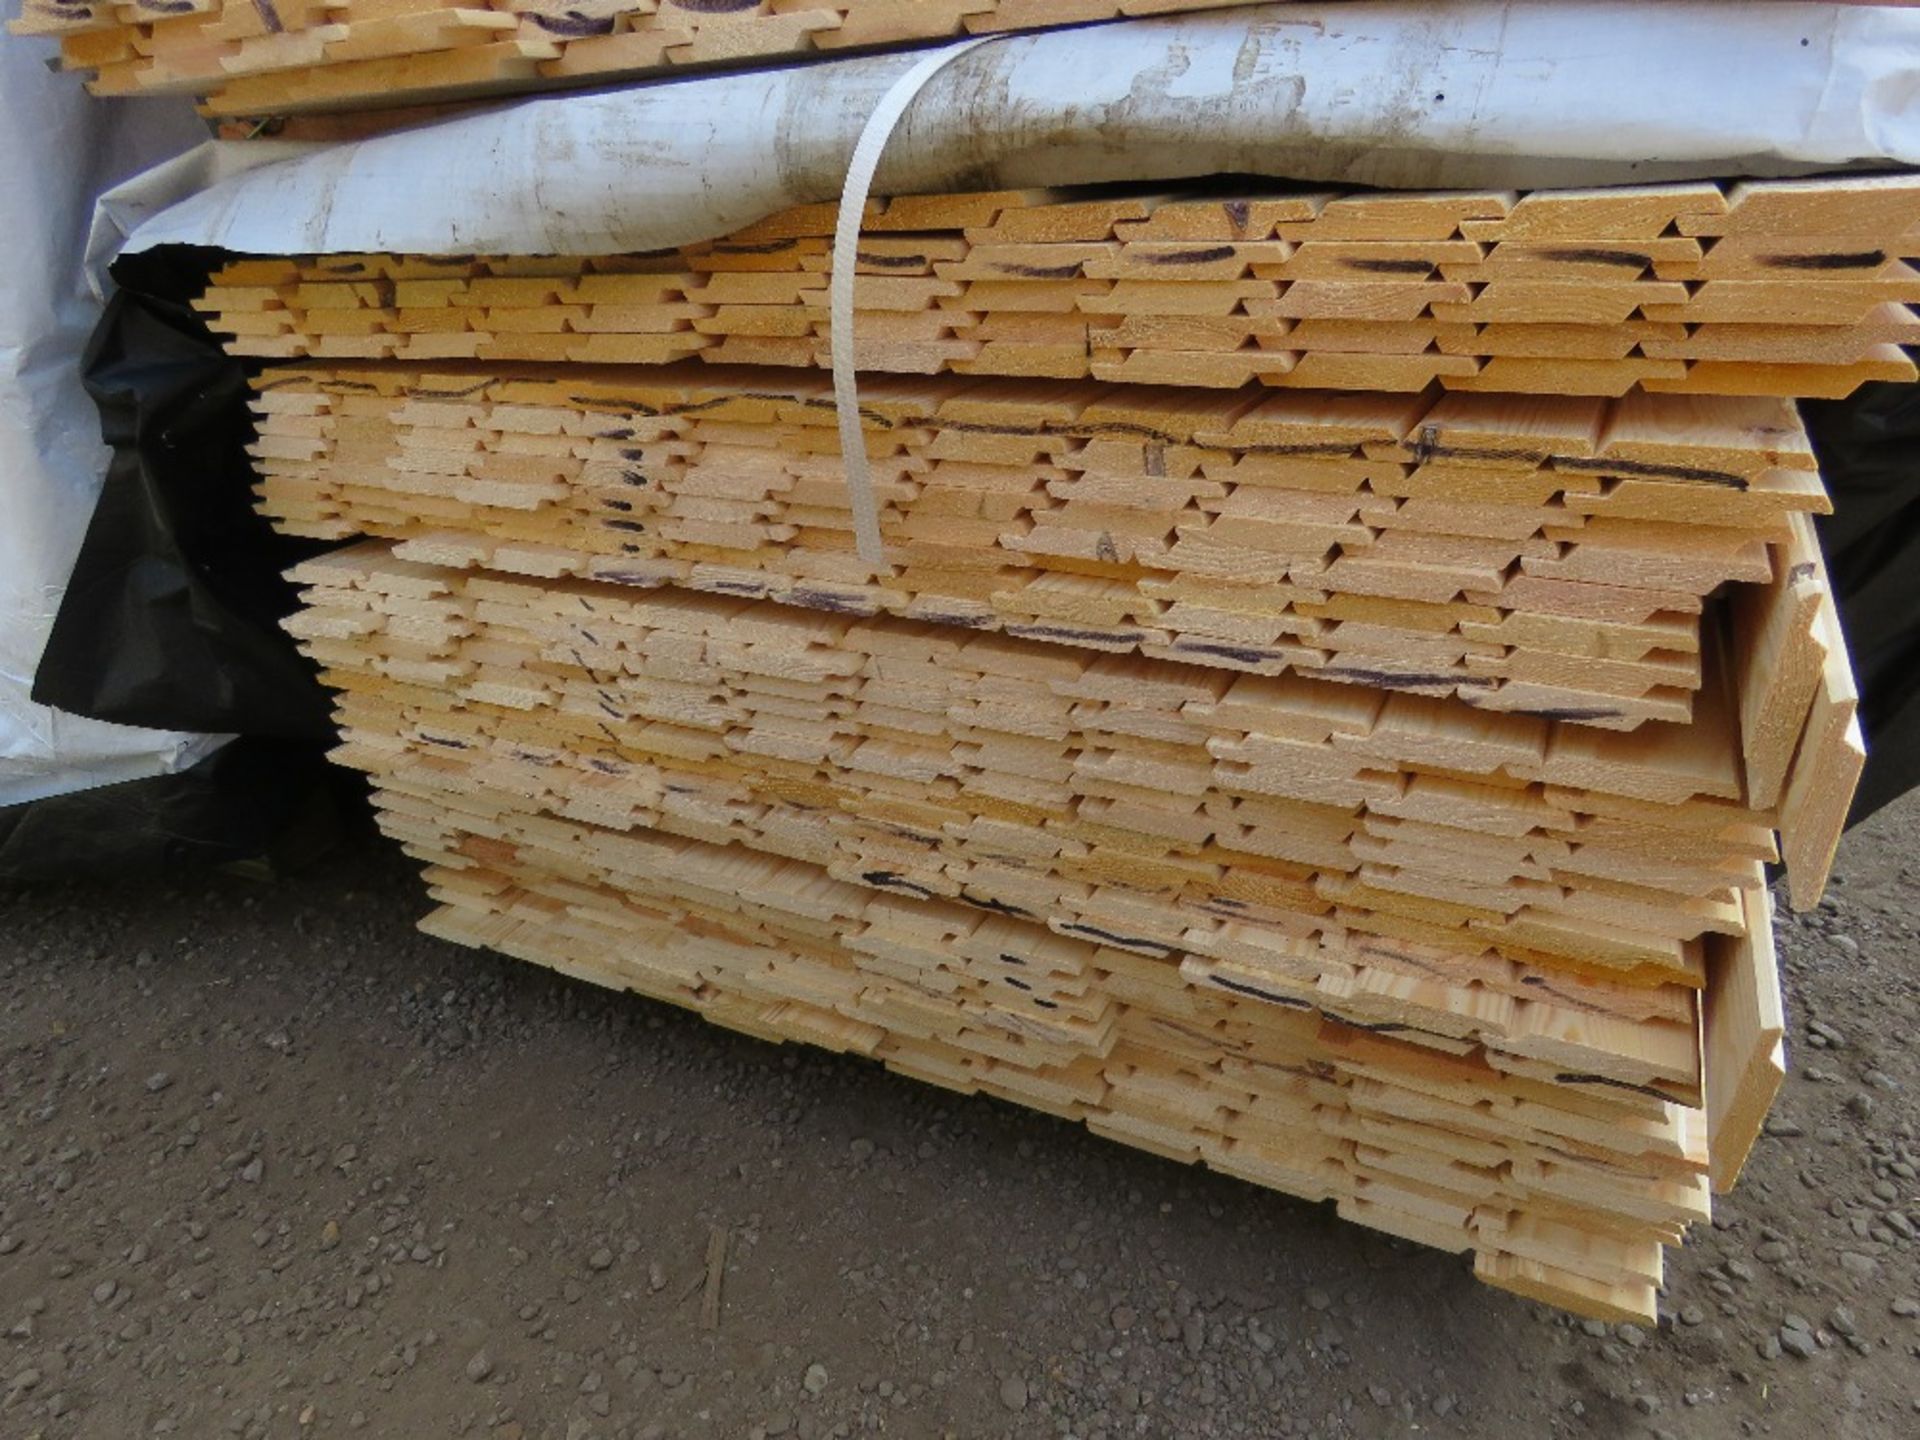 2 X PALLETS OF HIT AND MISS FENCE CLADDING TIMBER 0.83M - 1.12M APPROX X 100MM APPROX. - Image 13 of 15